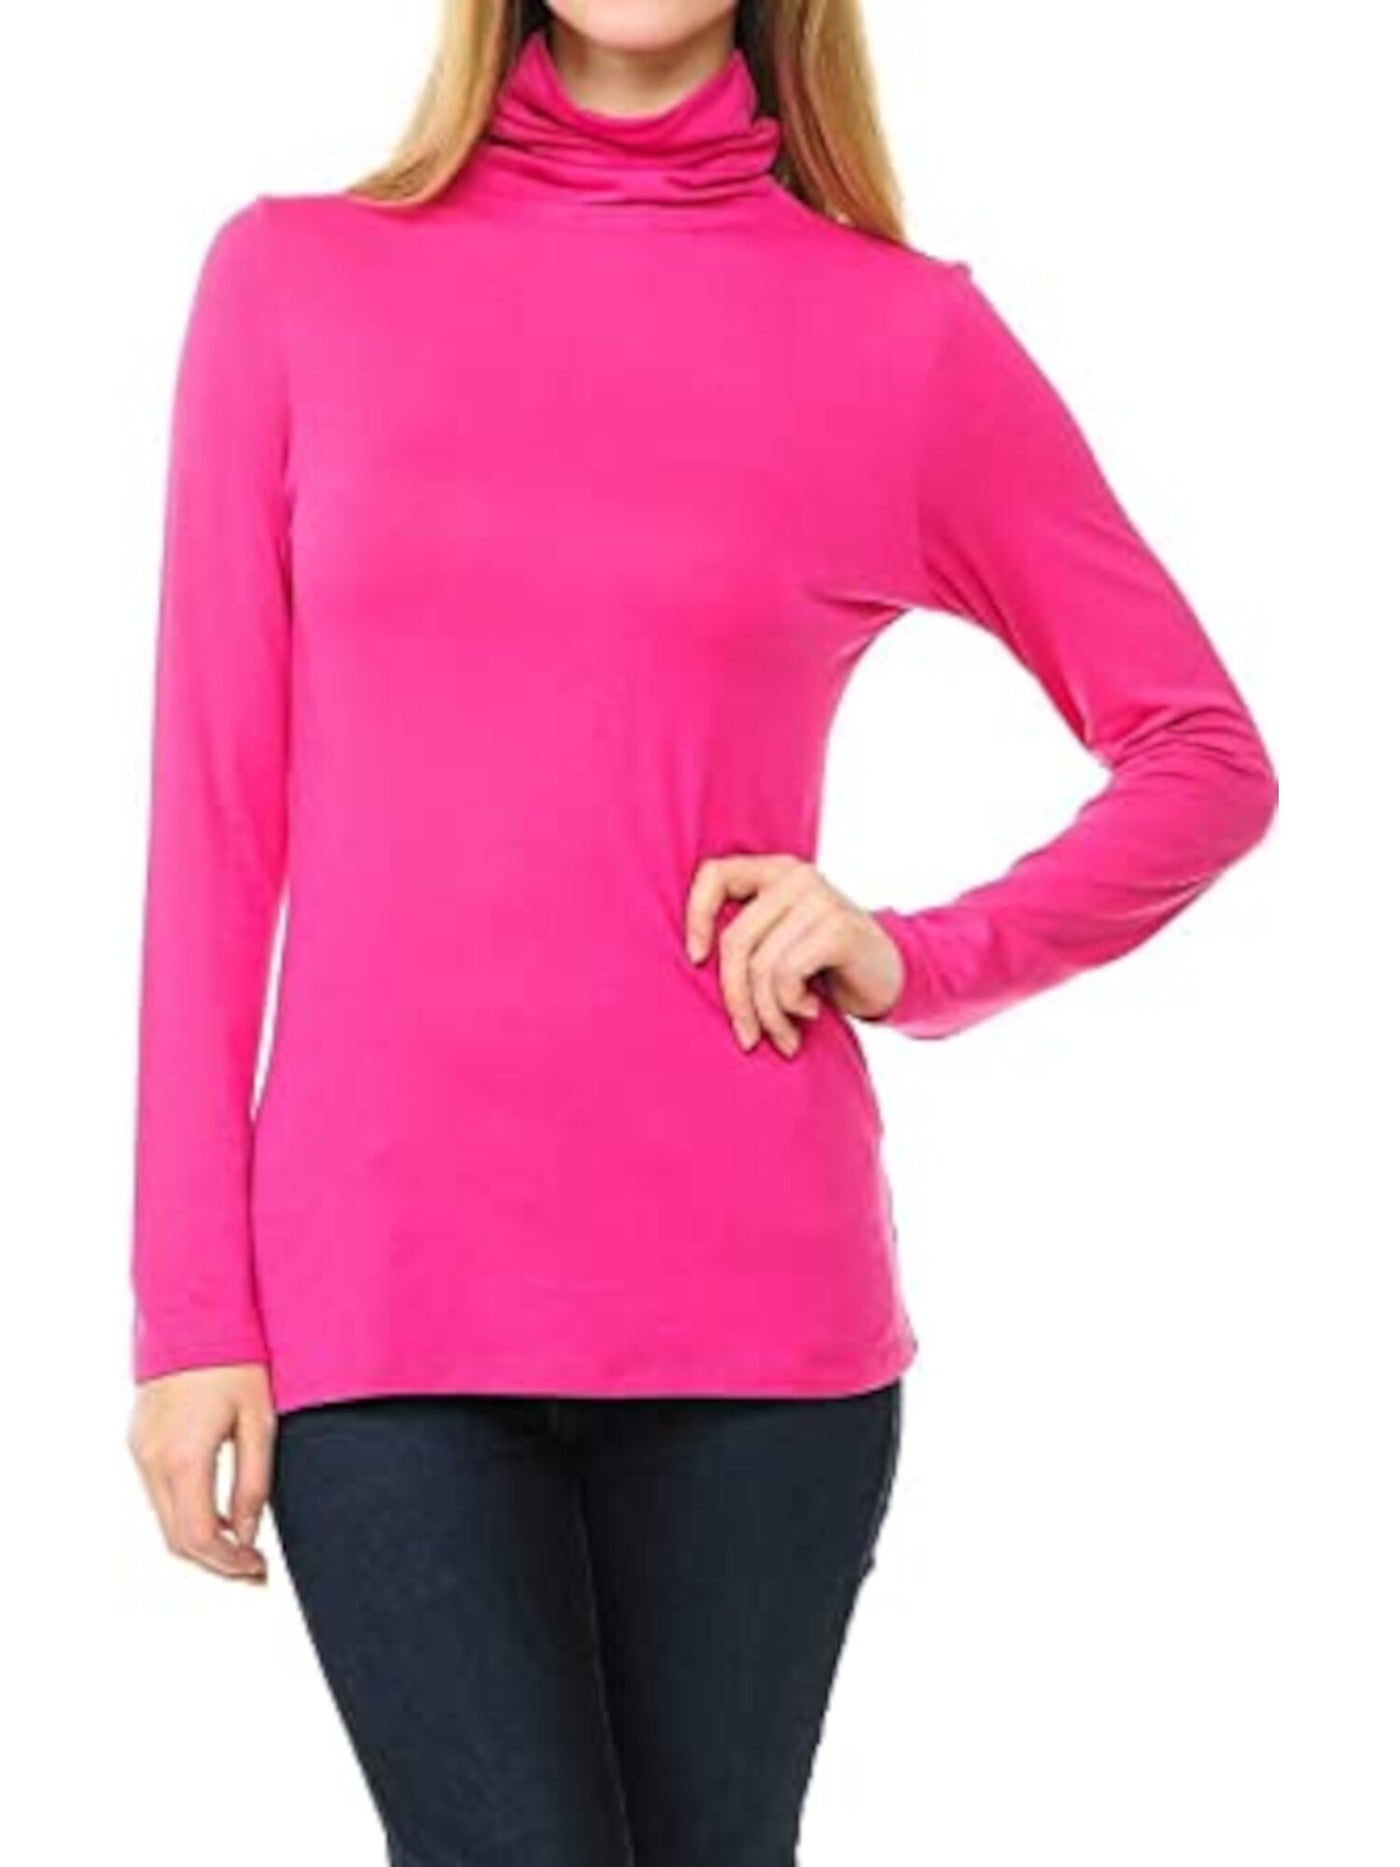 RILEY&RAE Womens Pink Long Sleeve Turtle Neck Wear To Work Top S